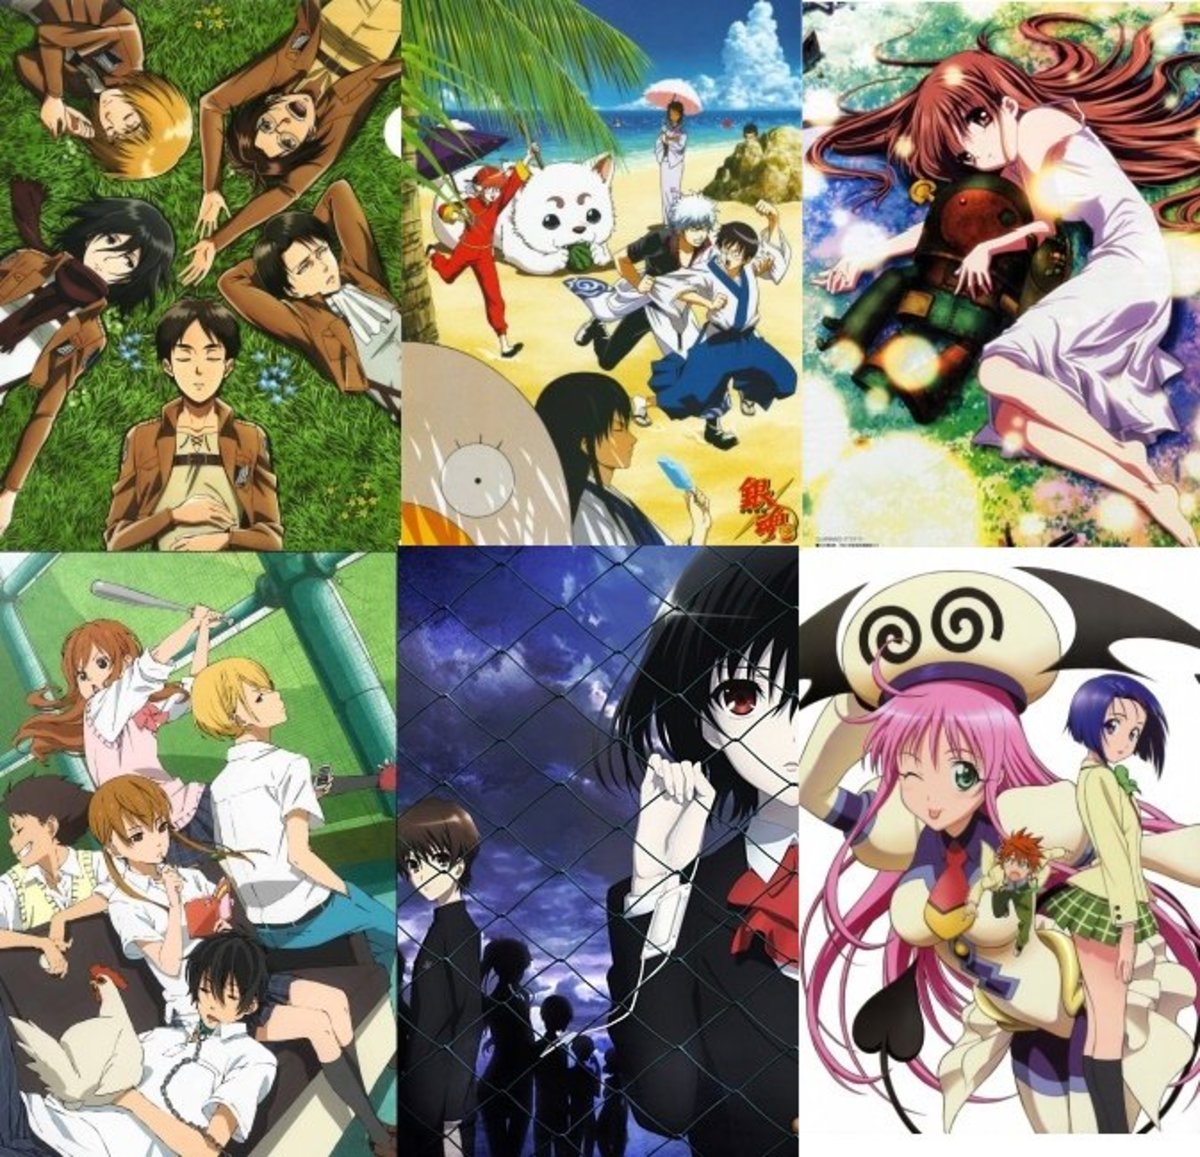 Sexual anime tv shows